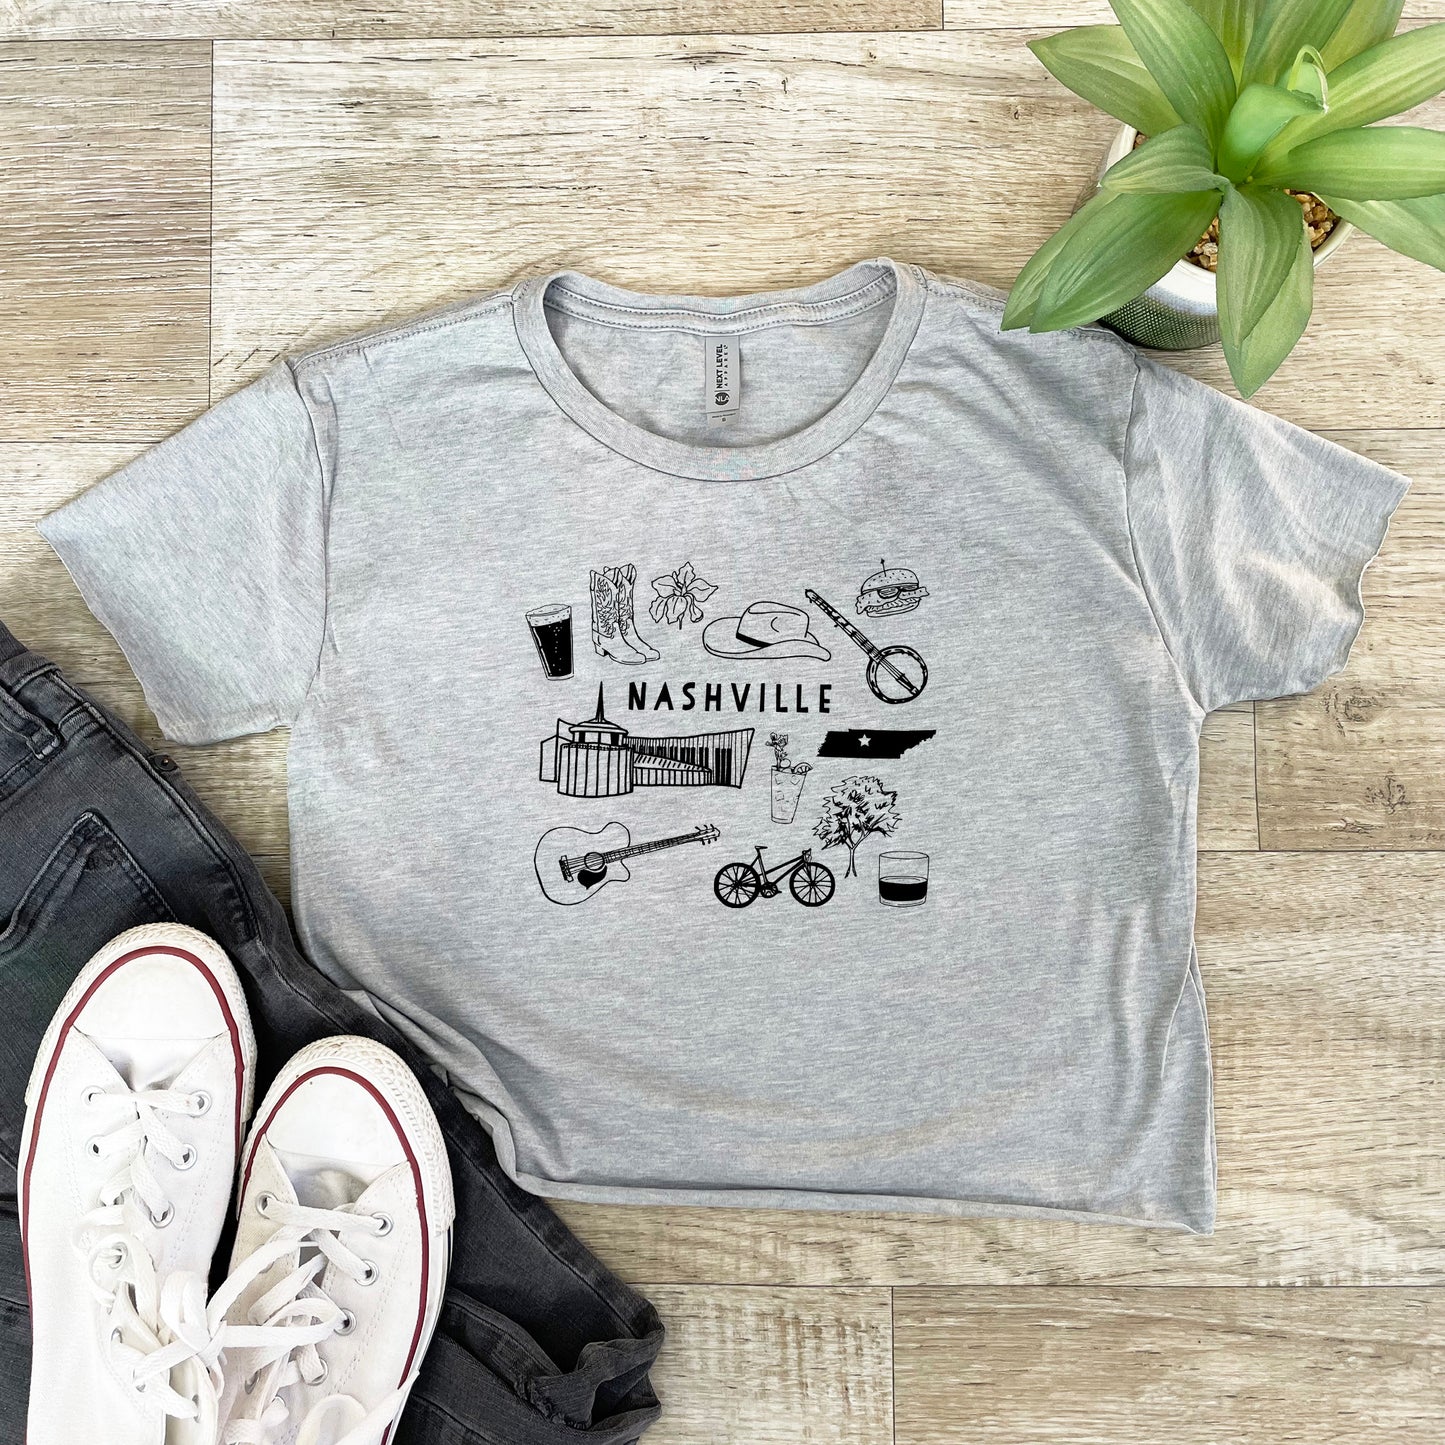 a t - shirt with the words nashville on it next to a pair of sneakers